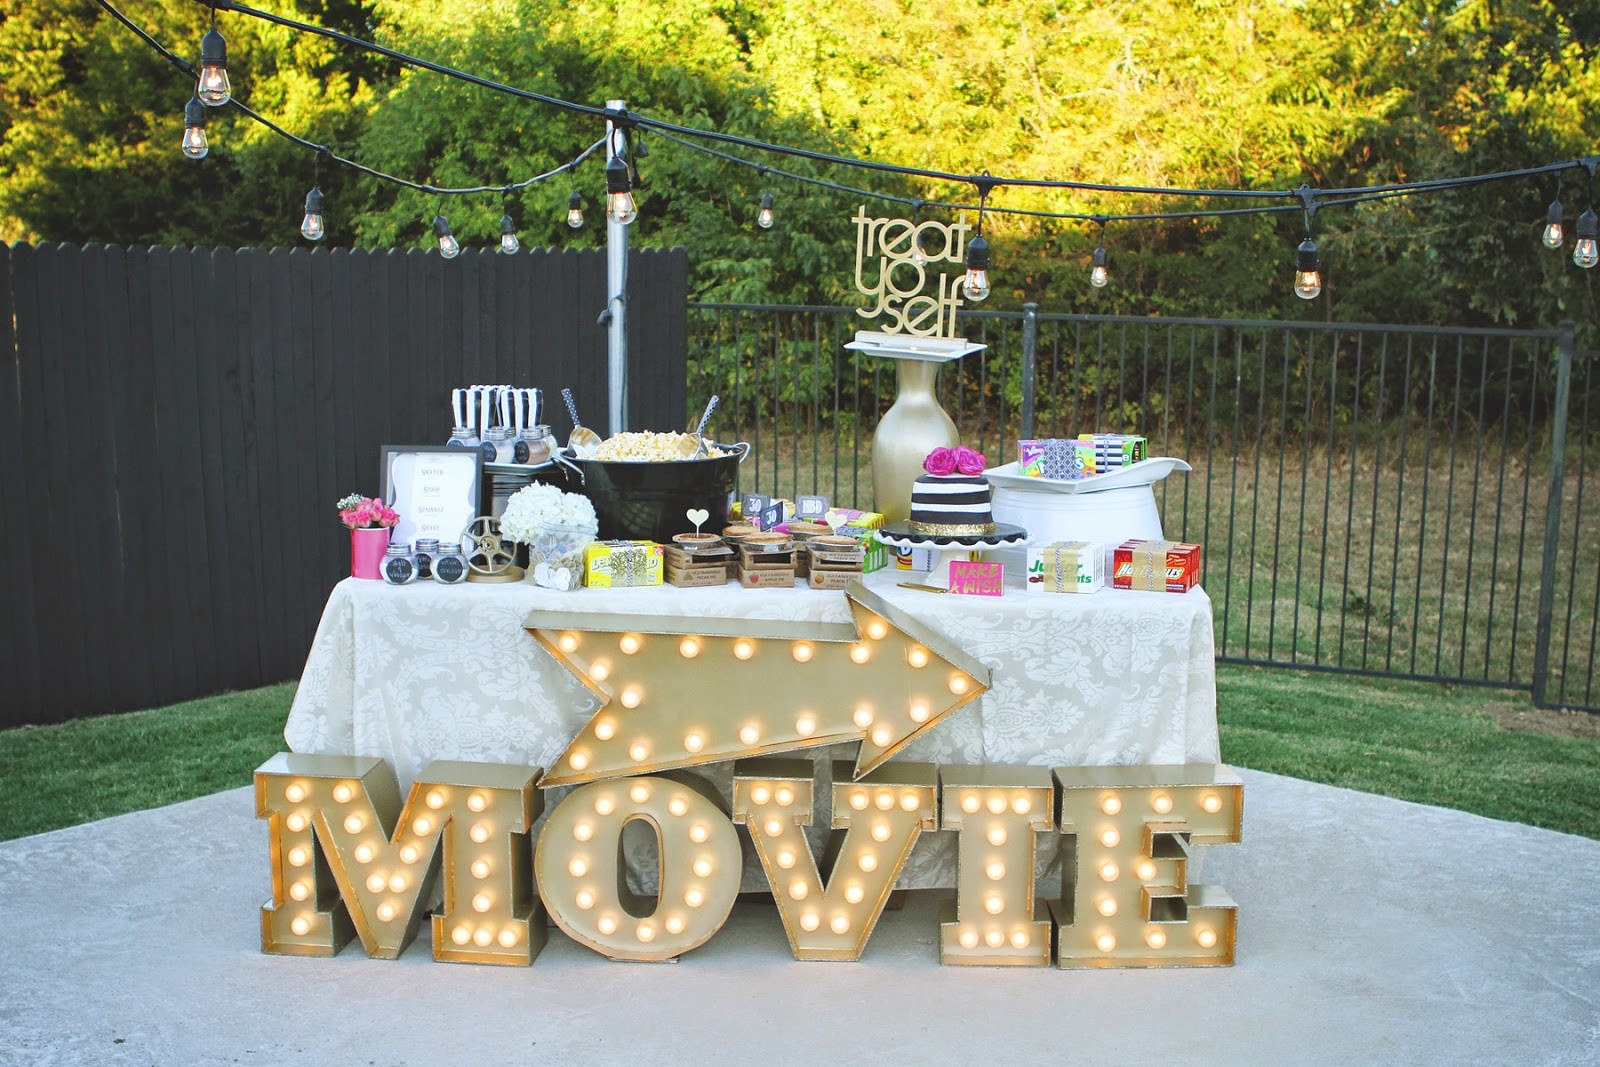 Backyard Party Ideas For Tweens
 PB J Babes Movie Night Under the Stars